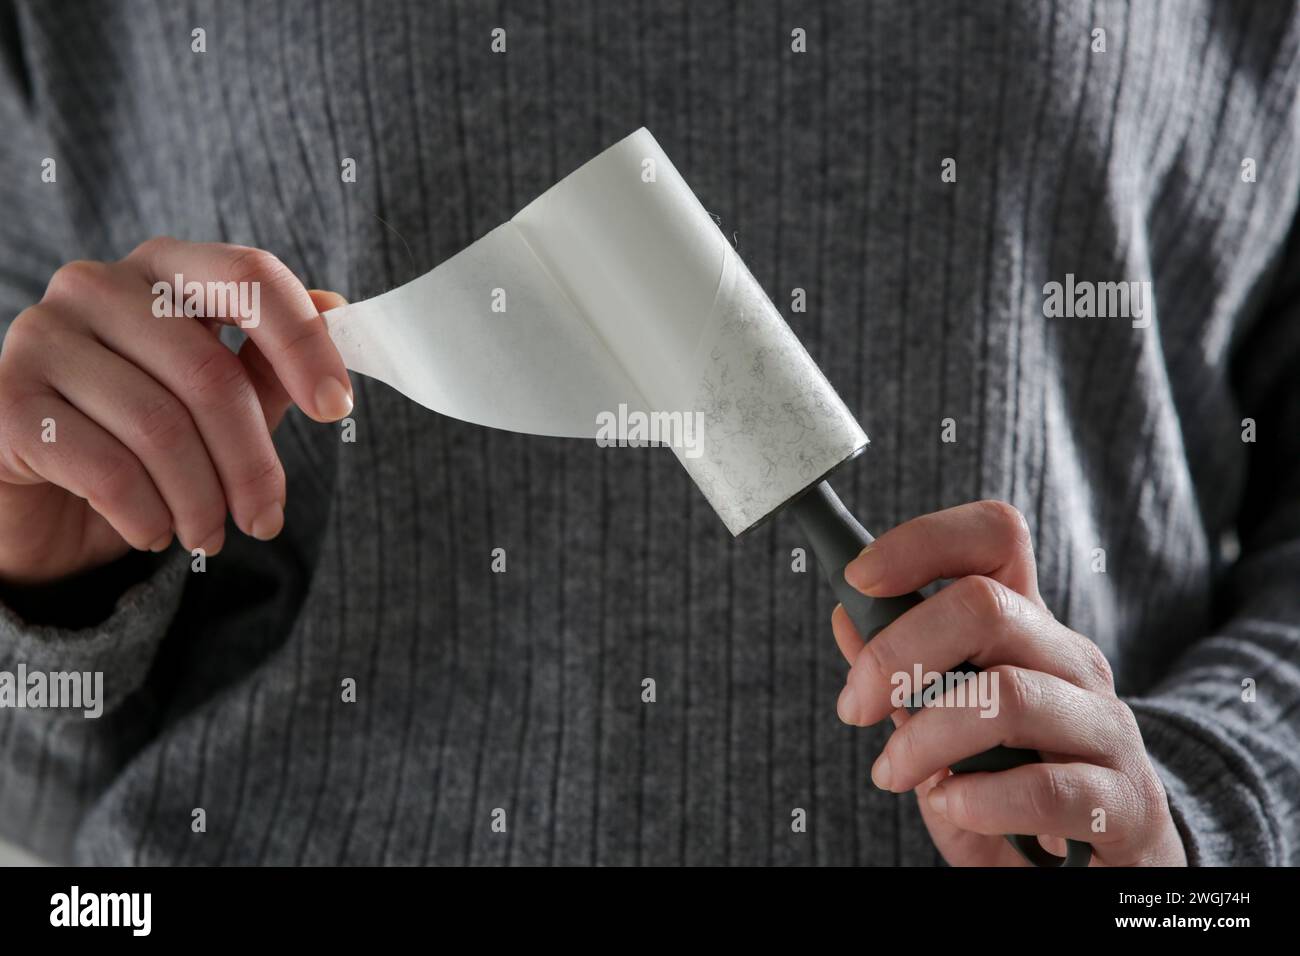 Hair remover roller. Woman using reusable clothes lint roller cleaner. Stock Photo